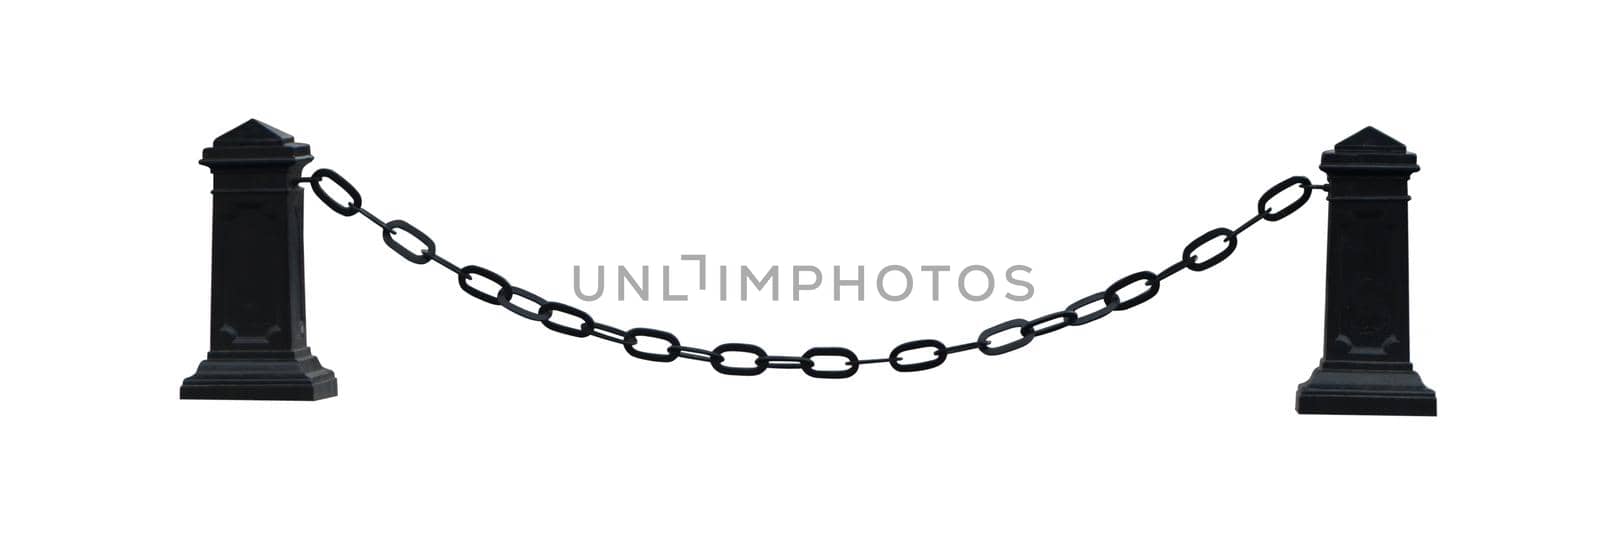 Stretched metal chain between the pillars on a white background in isolation by A_A